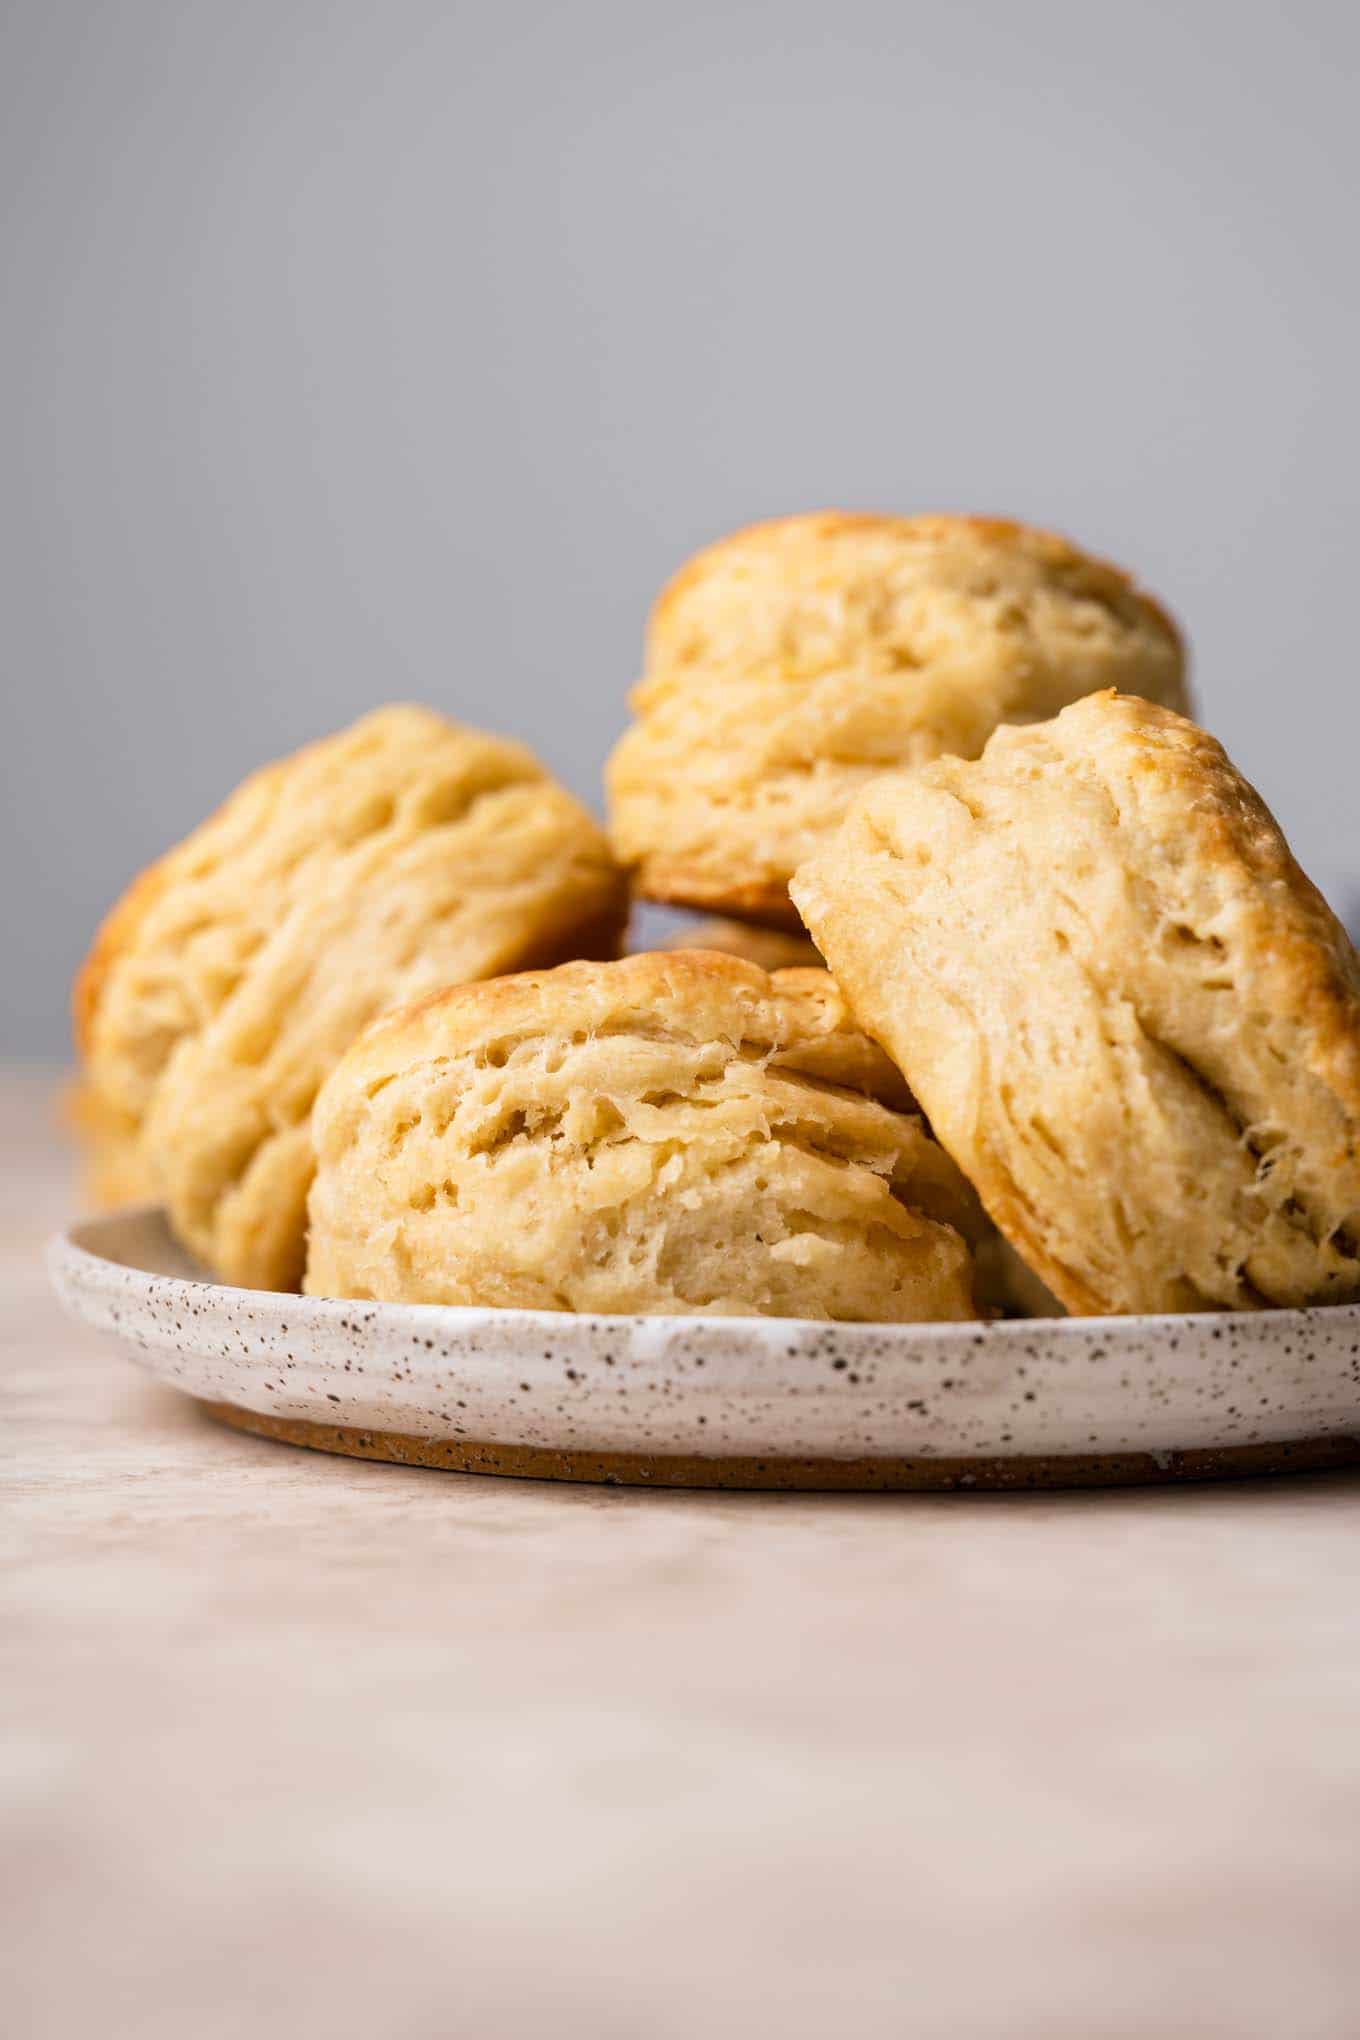 side view of vegan biscuits piled on a plate showing the flaky layers